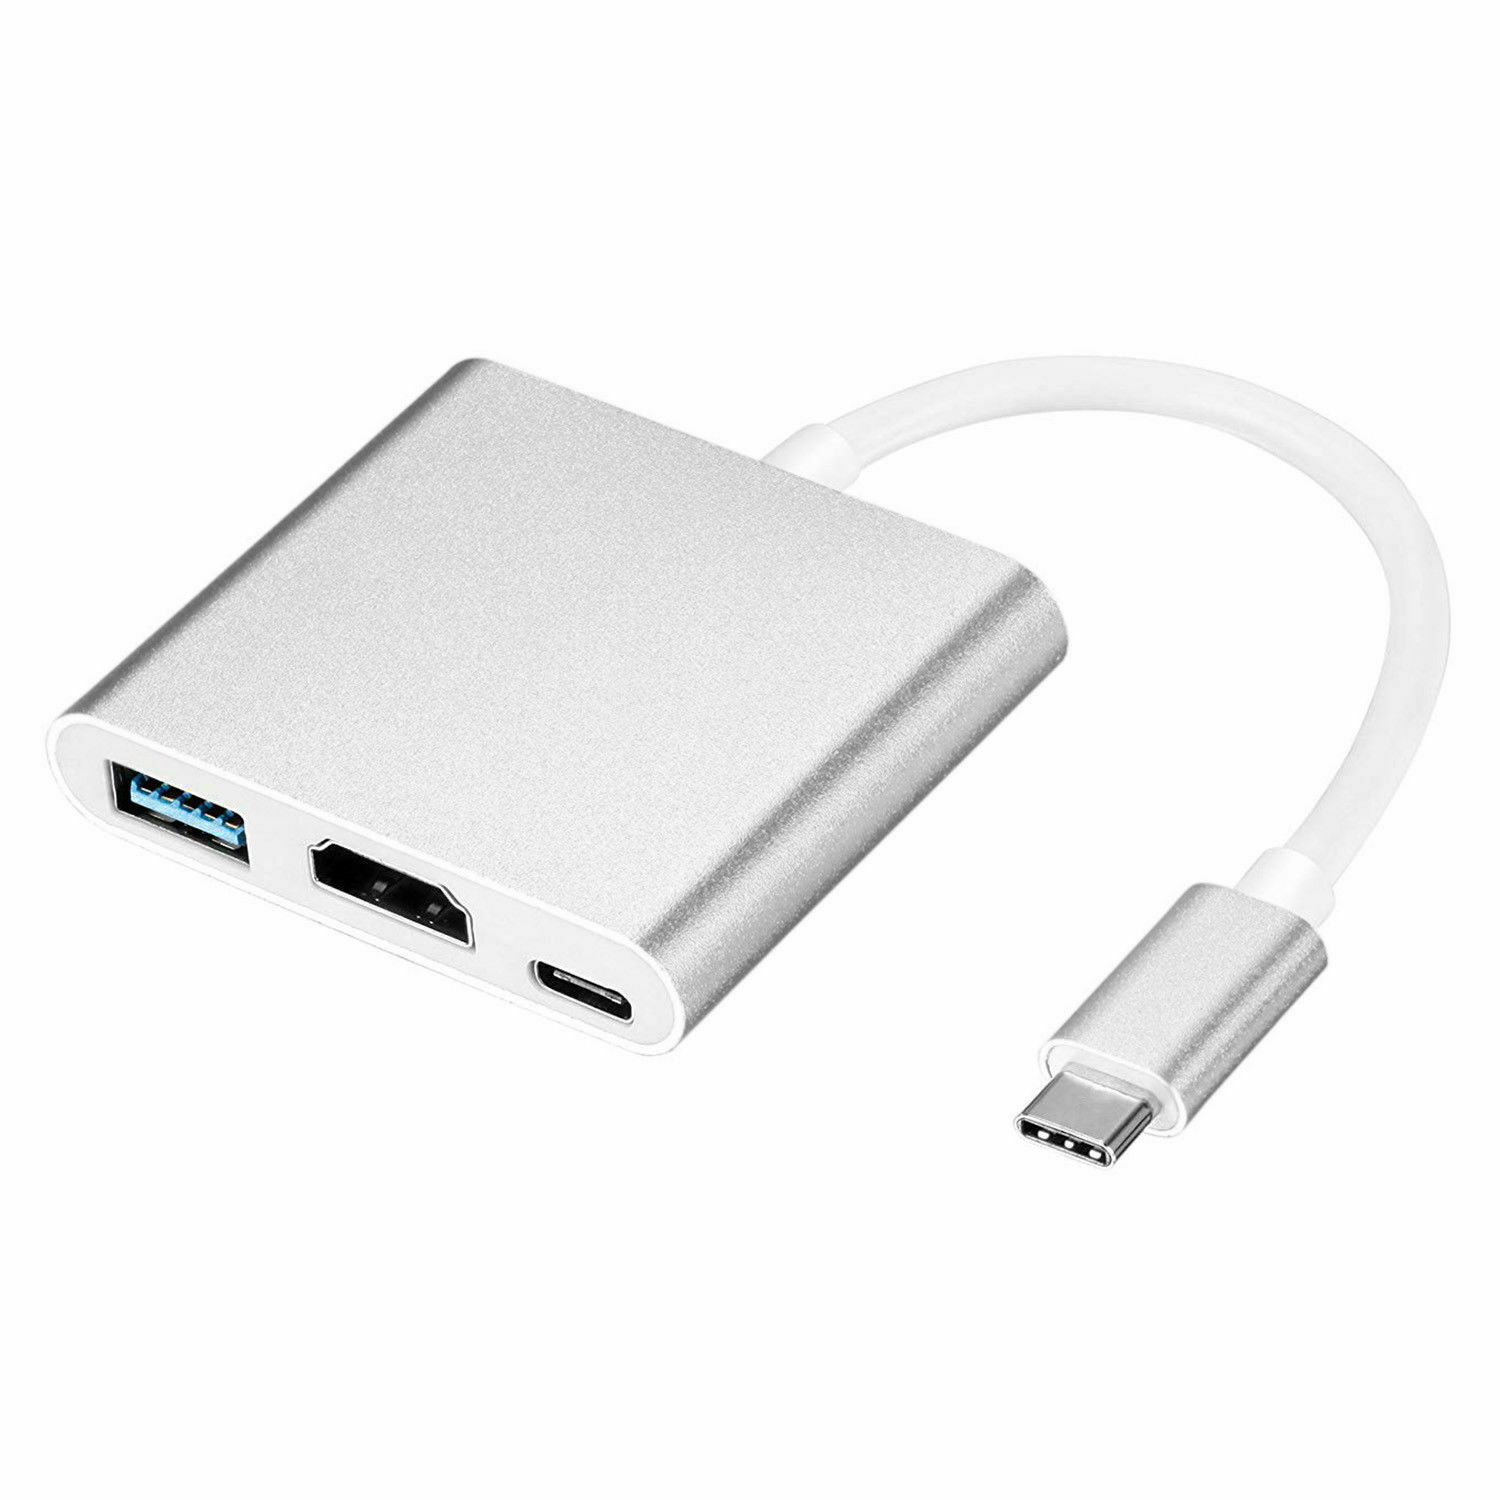 UBS 3.1 Type-C to 4K HDMI and USB 3.0 Adapter Cable Converter for MacBook 